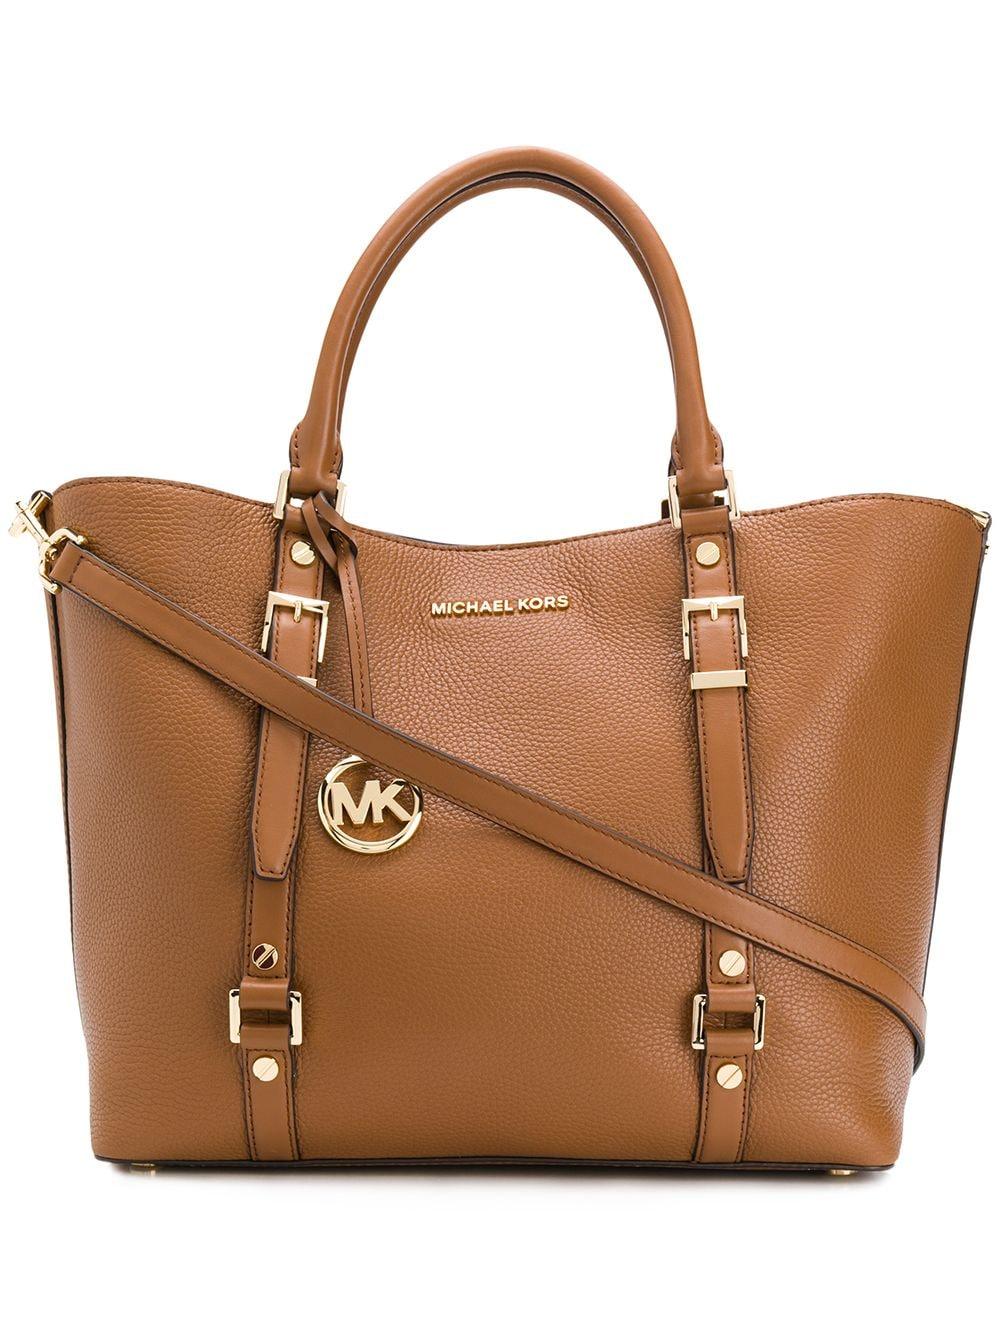 MICHAEL Michael Kors Leather Bedford Legacy Tote in Brown - Lyst